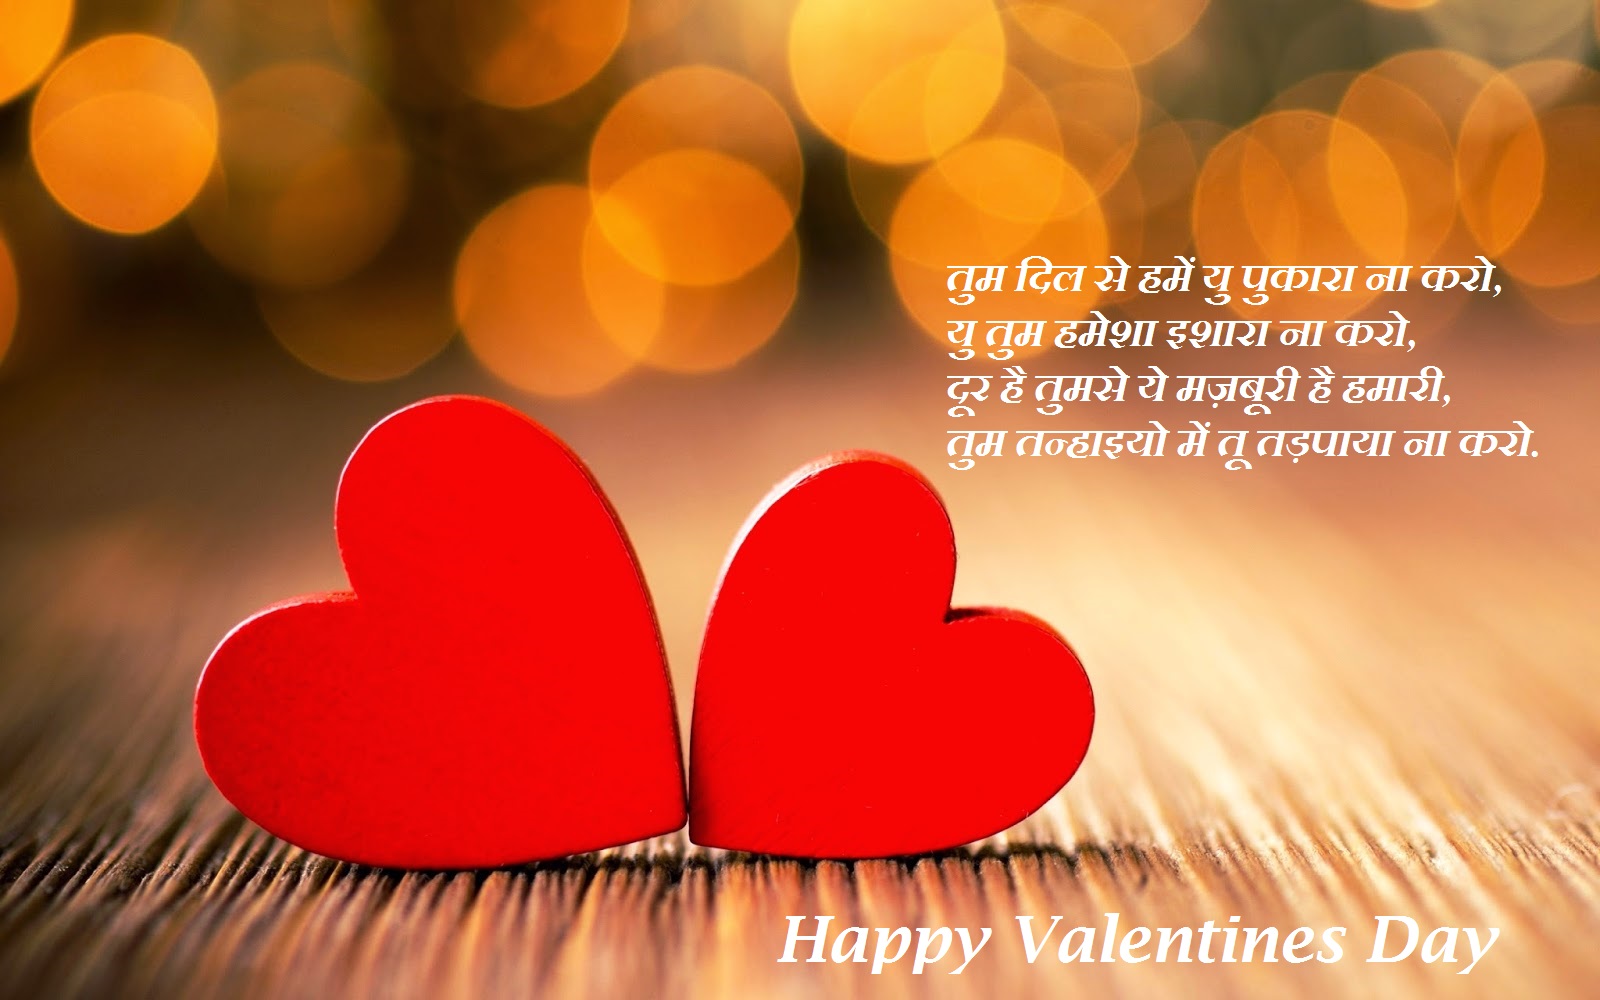 Happy Valentine’s Day Messages, Status and SMS for Husband - Wife - Badhaai.com1600 x 1000